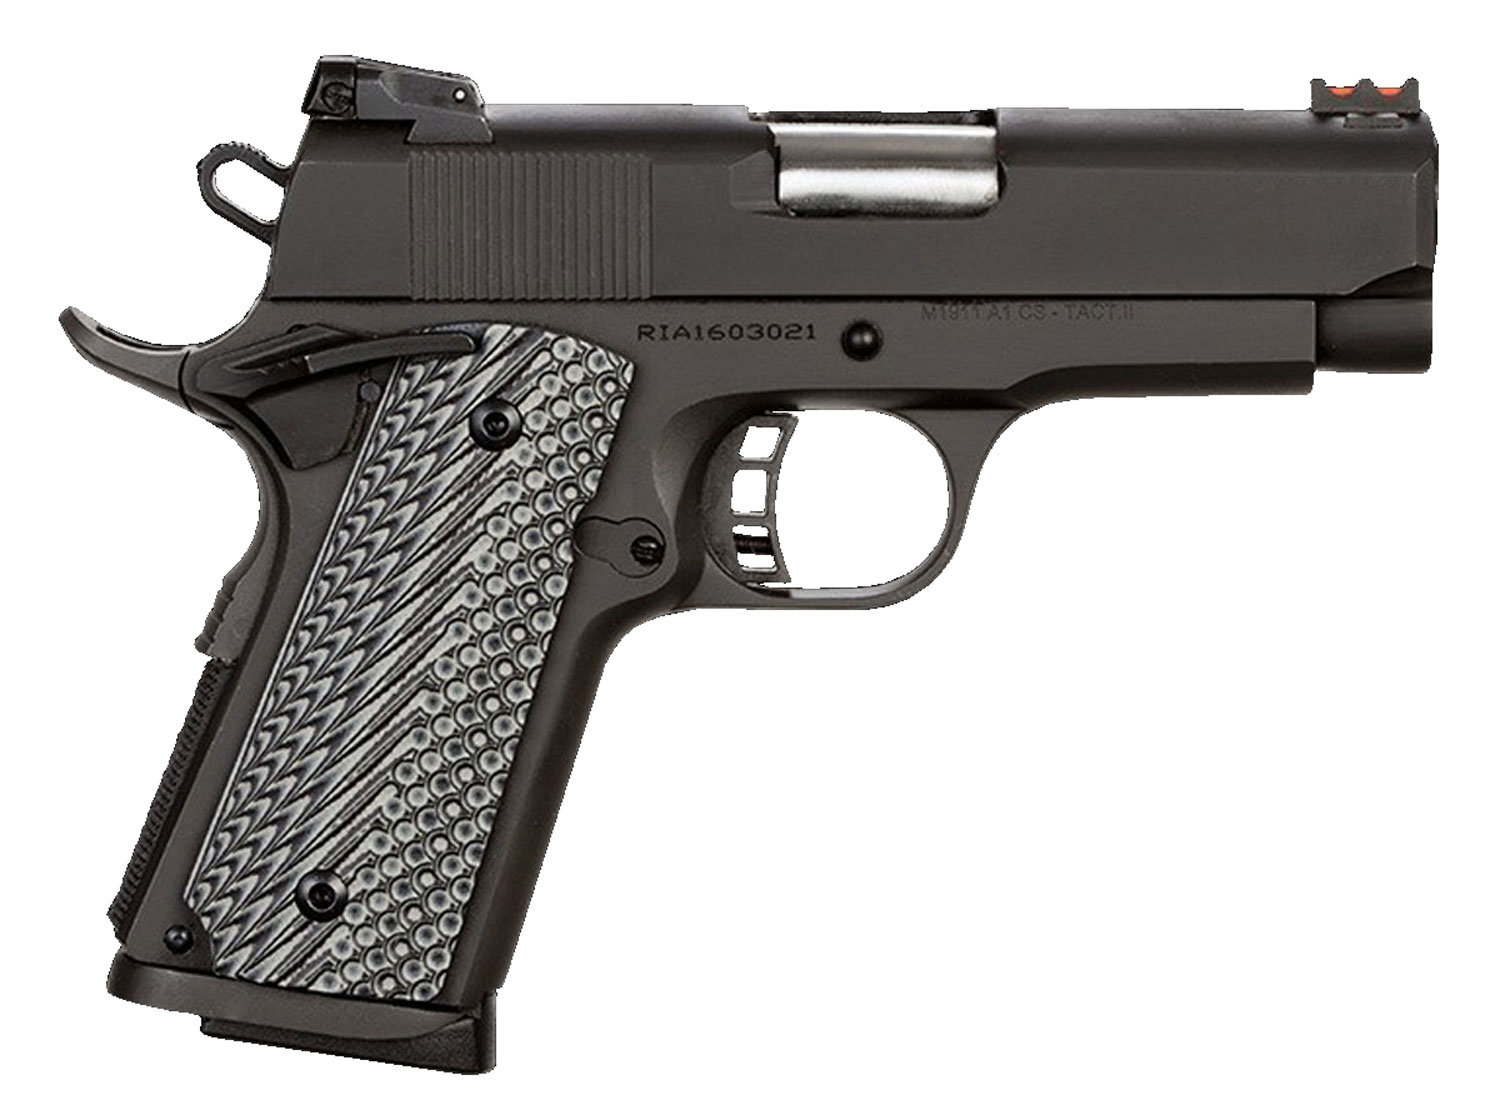 Rock Island M1911 A1 Tactical Ii Compact 45acp 35 7rd Pistol Parkerized W G10 Grips Kygunco 3782